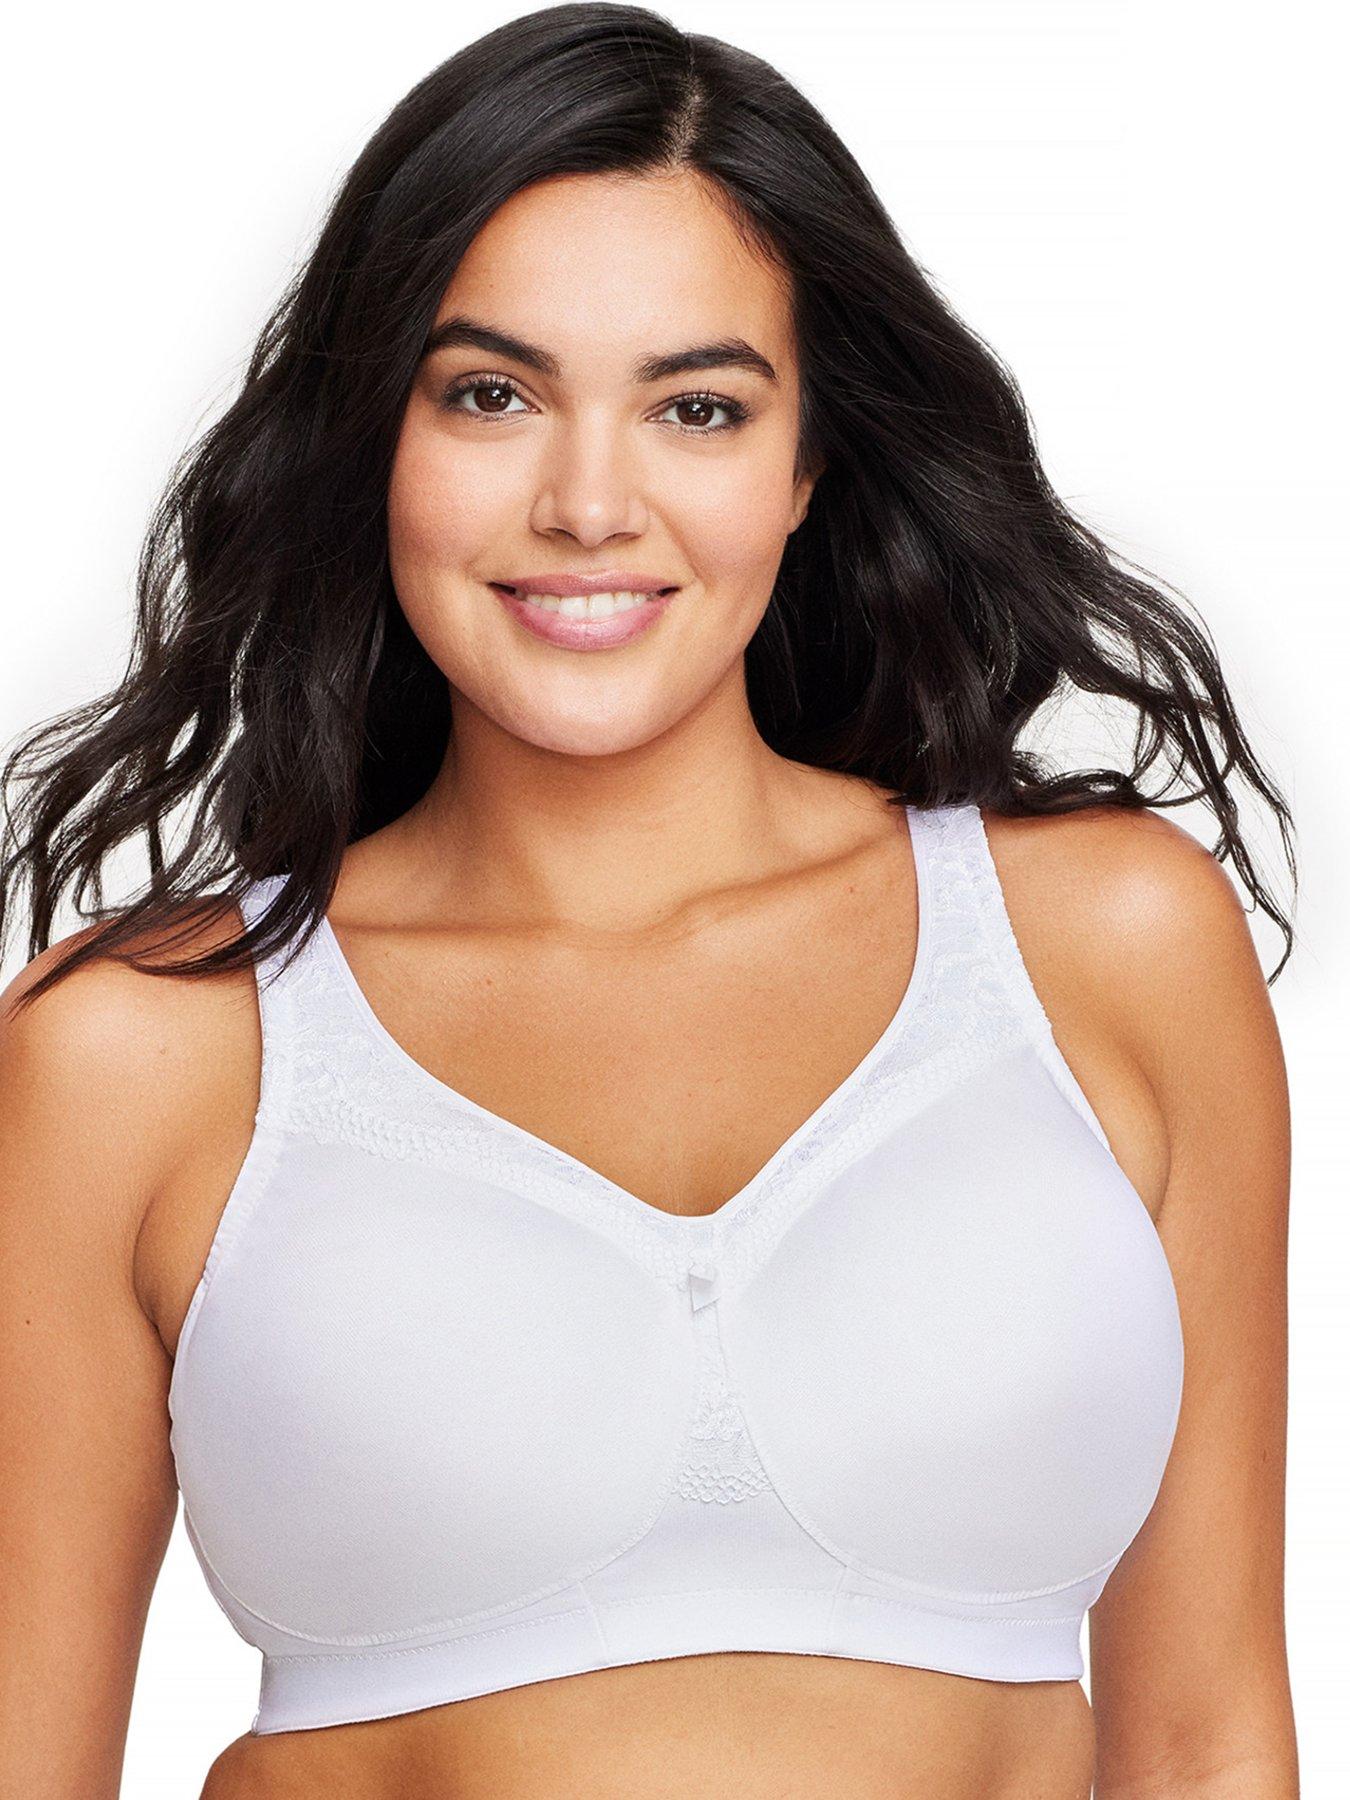 1,067 Sports Bra That Lifts And Separates Images, Stock Photos, 3D